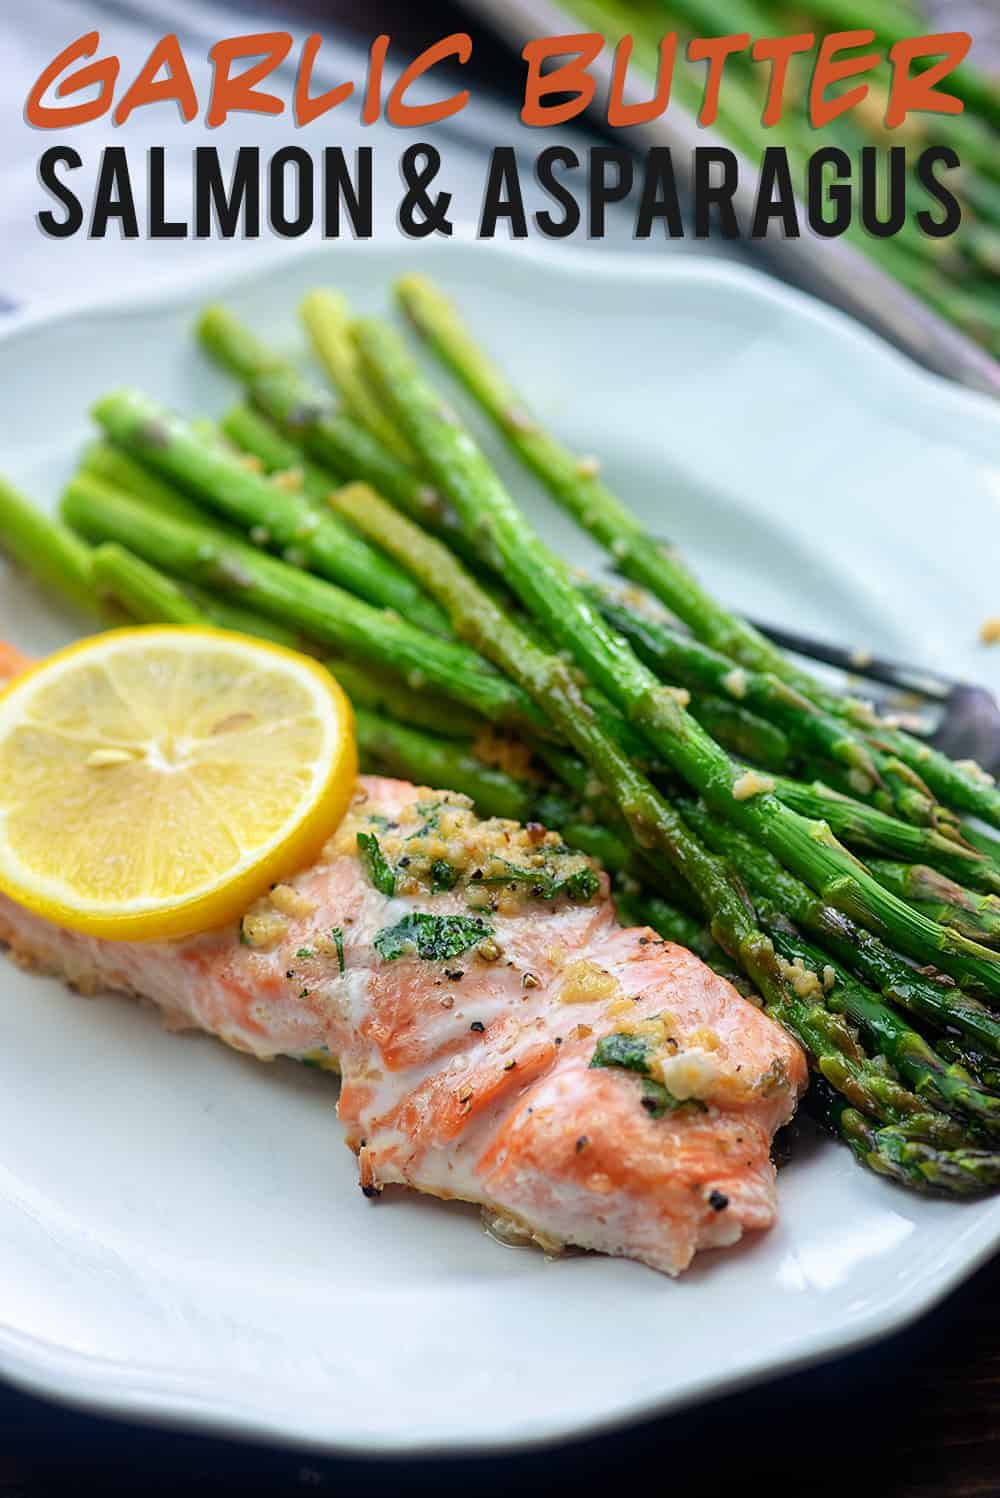 Garlic butter salmon and asparagus on a white plate.